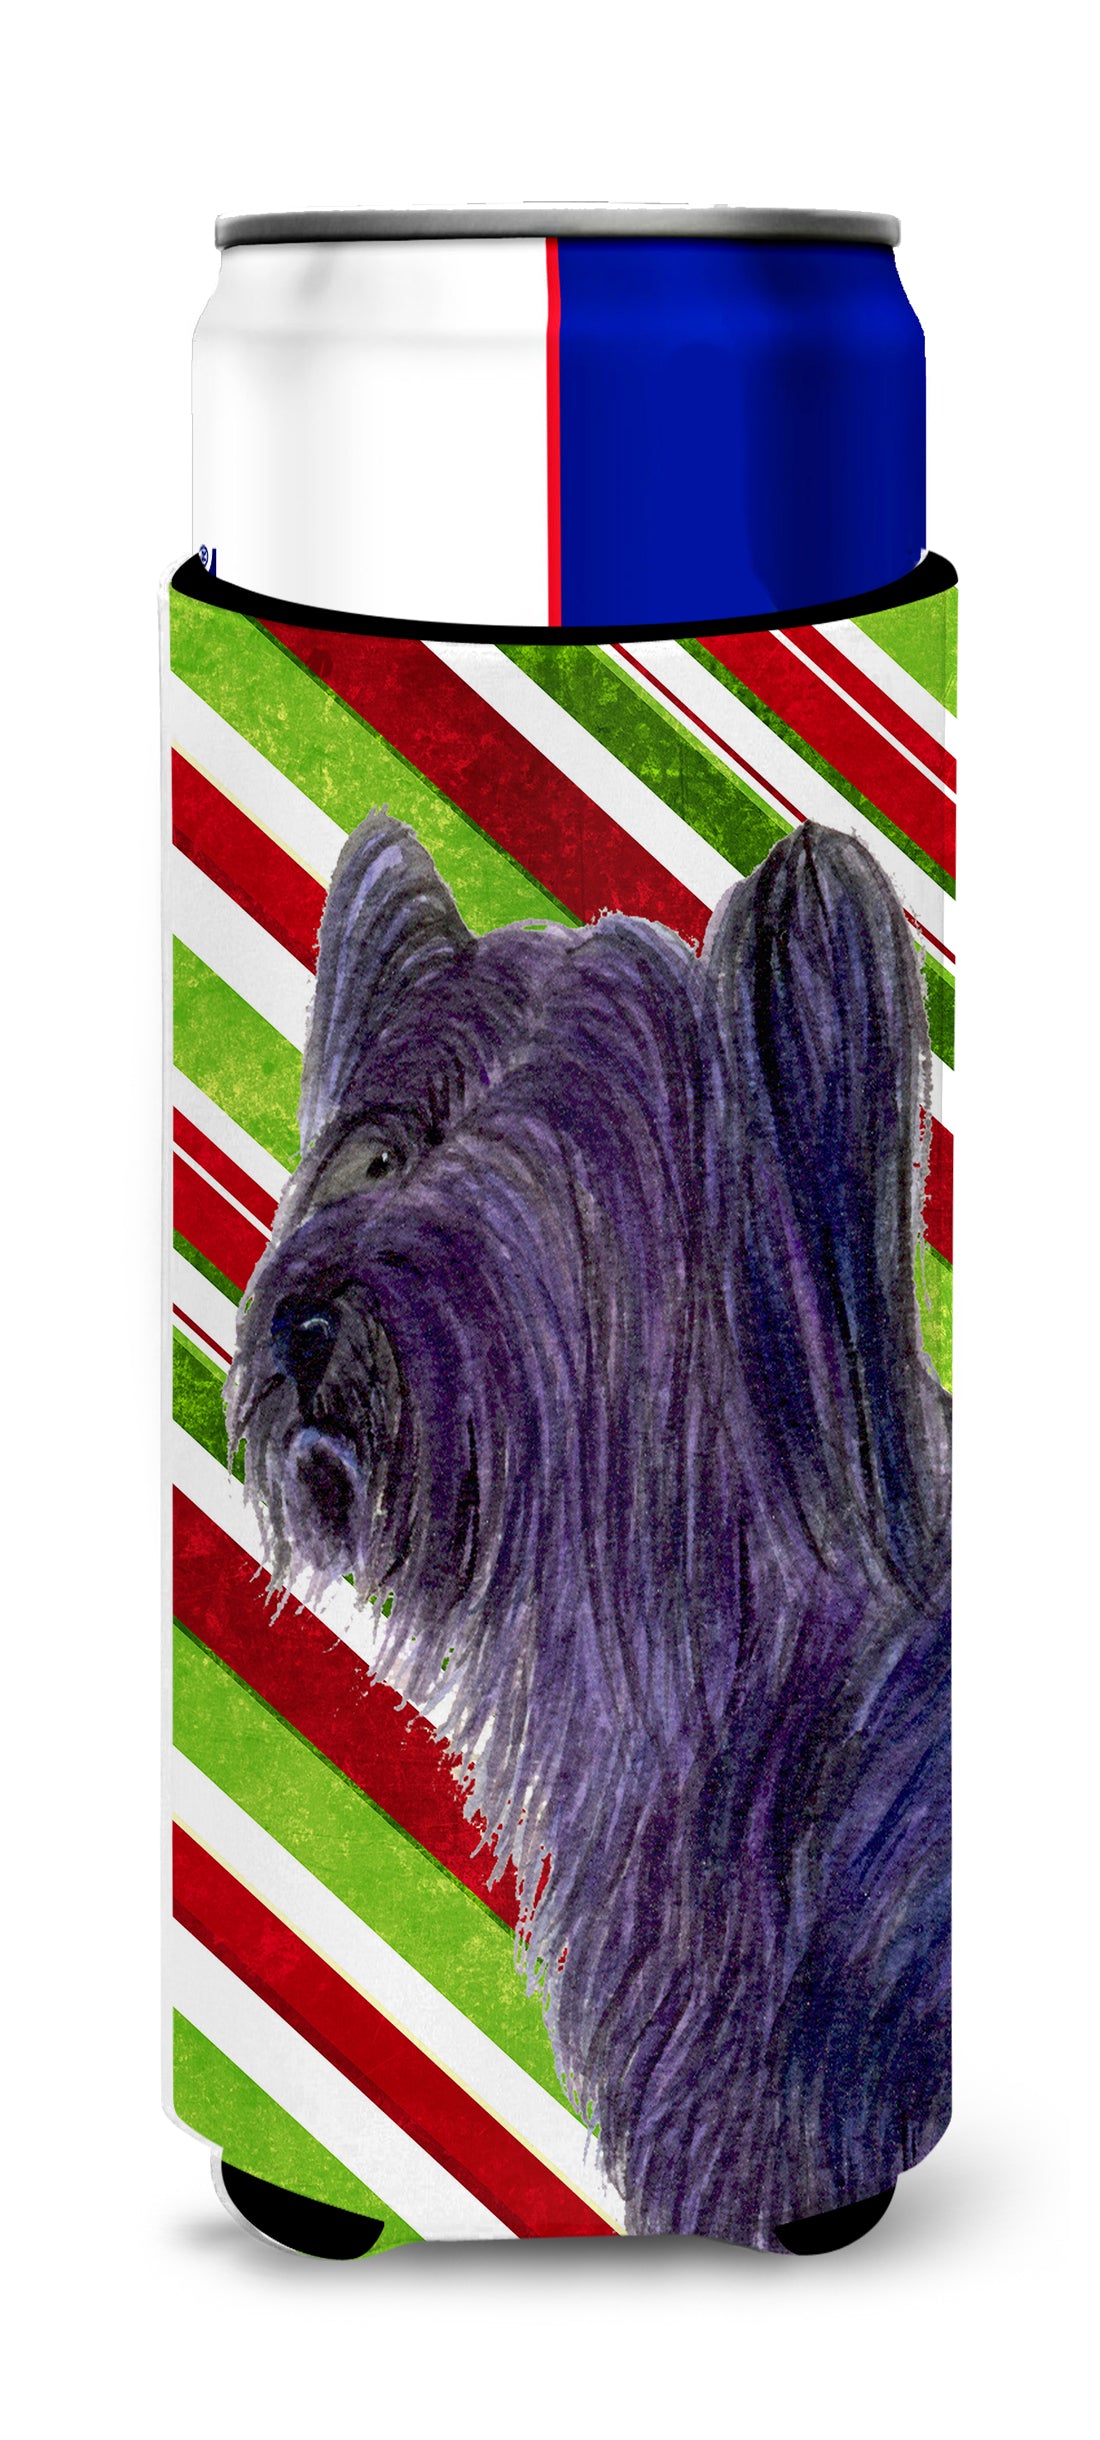 Skye Terrier Candy Cane Holiday Christmas Ultra Beverage Insulators for slim cans SS4532MUK.